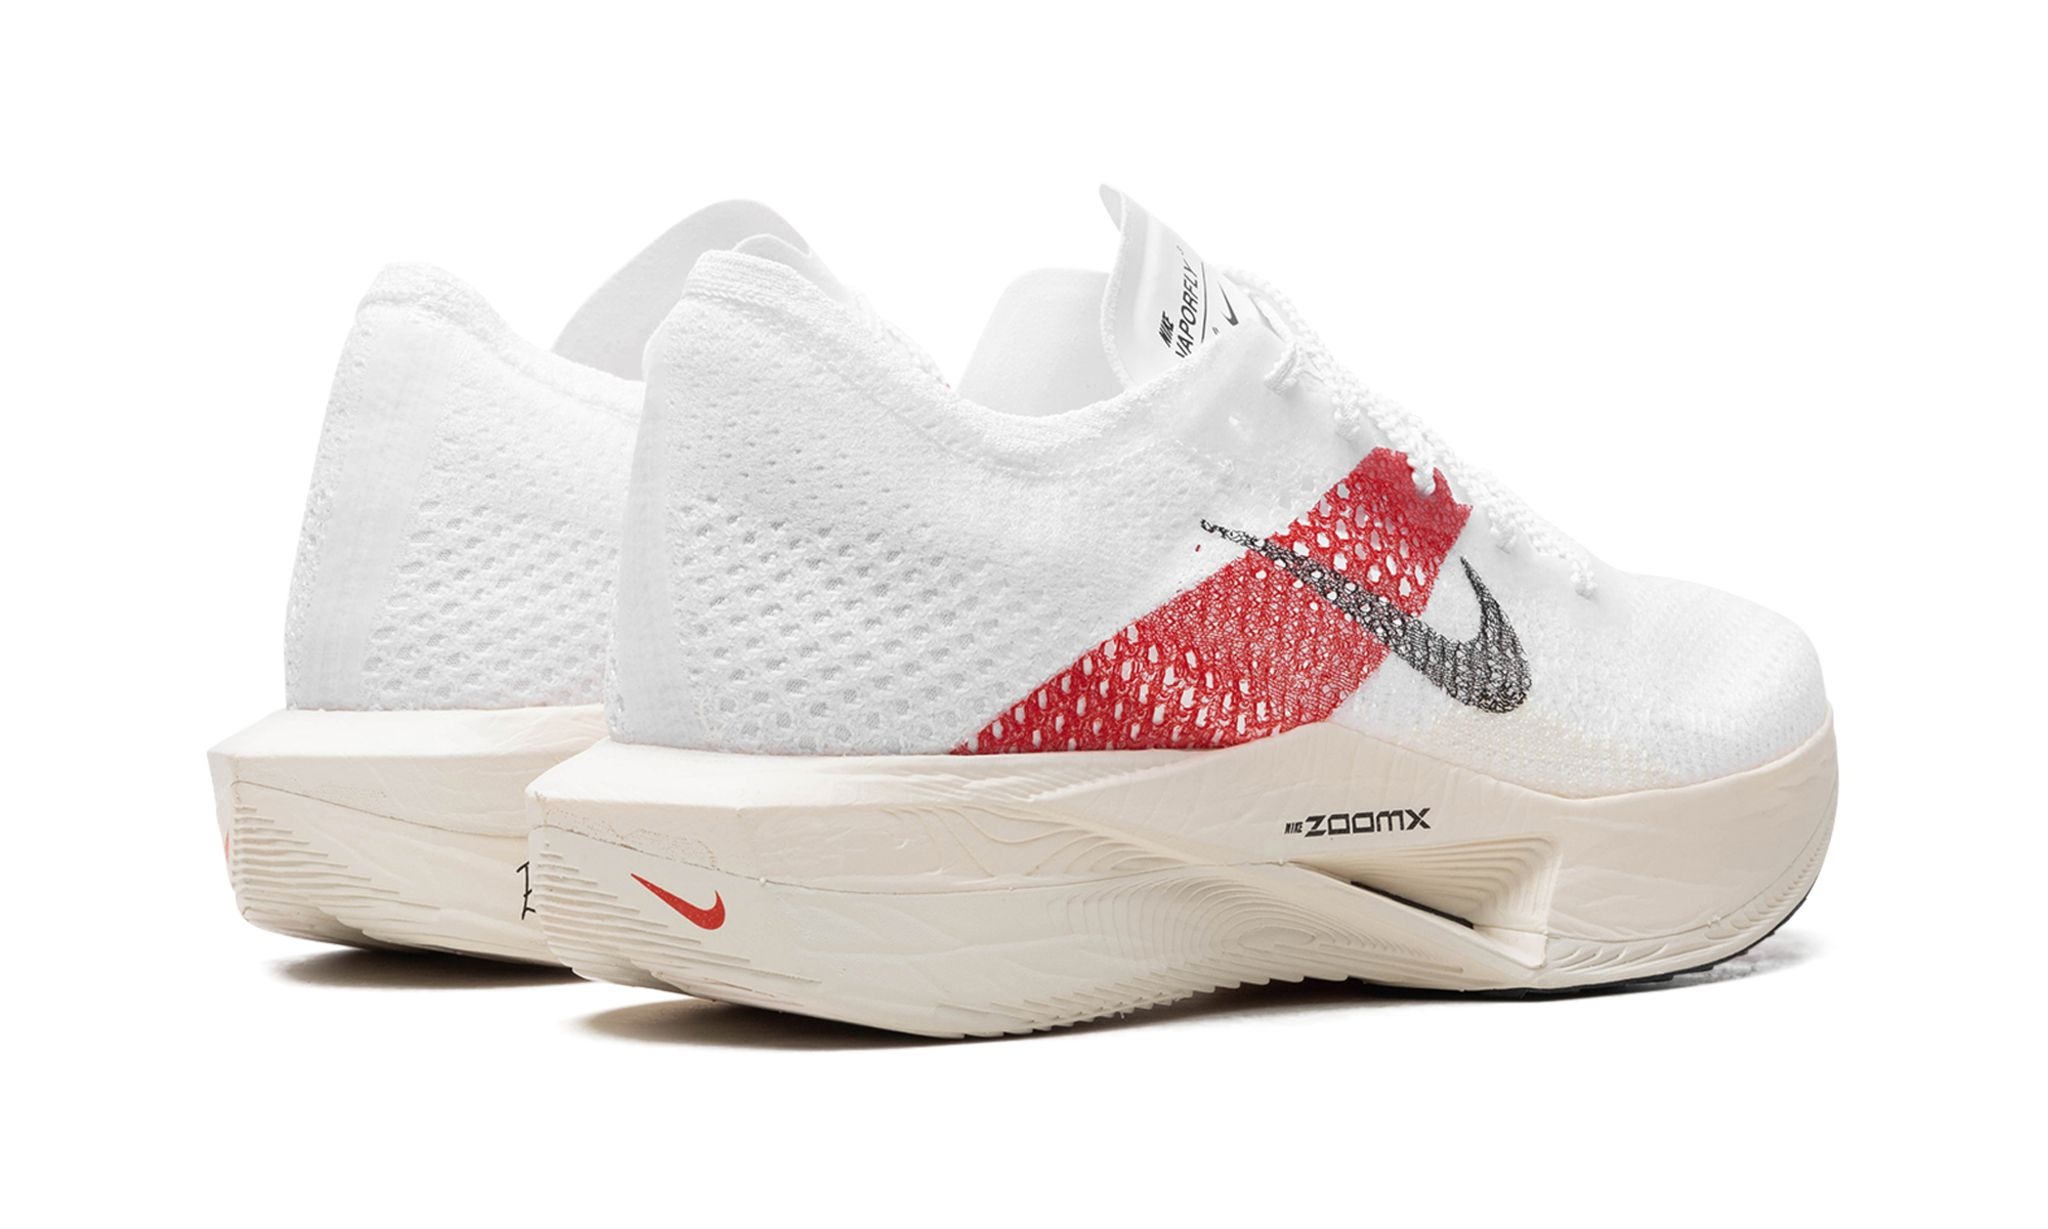 Zoomx Vaporfly Next% 3 EK "Chile Red" - 3